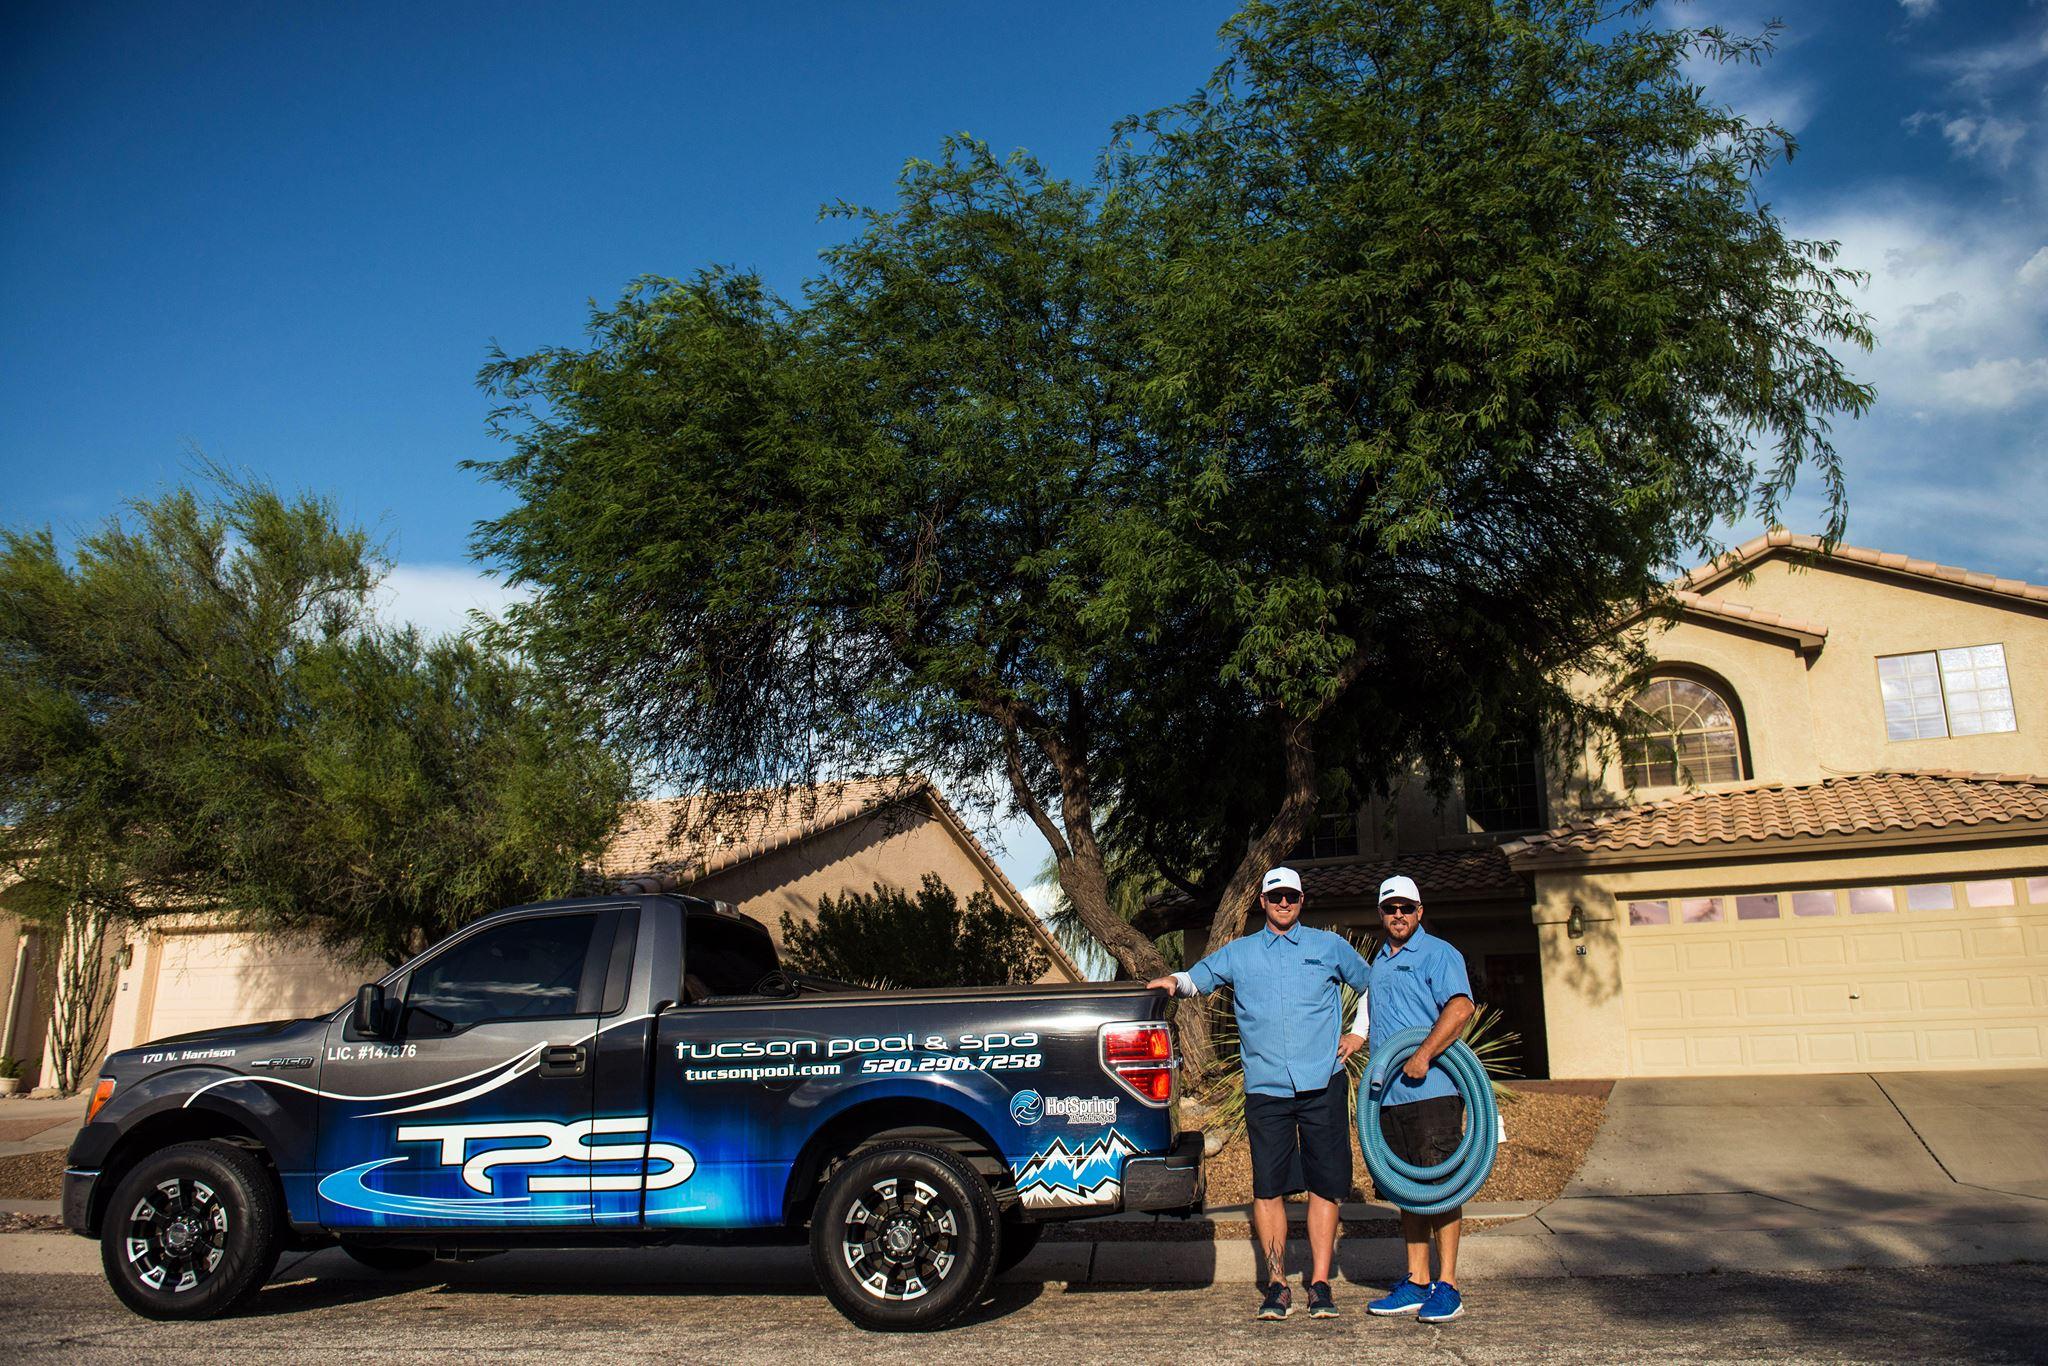 Owner and team member by Tucson Pools and Spa's Truck Tucson Pool & Spa Tucson (520)296-0993